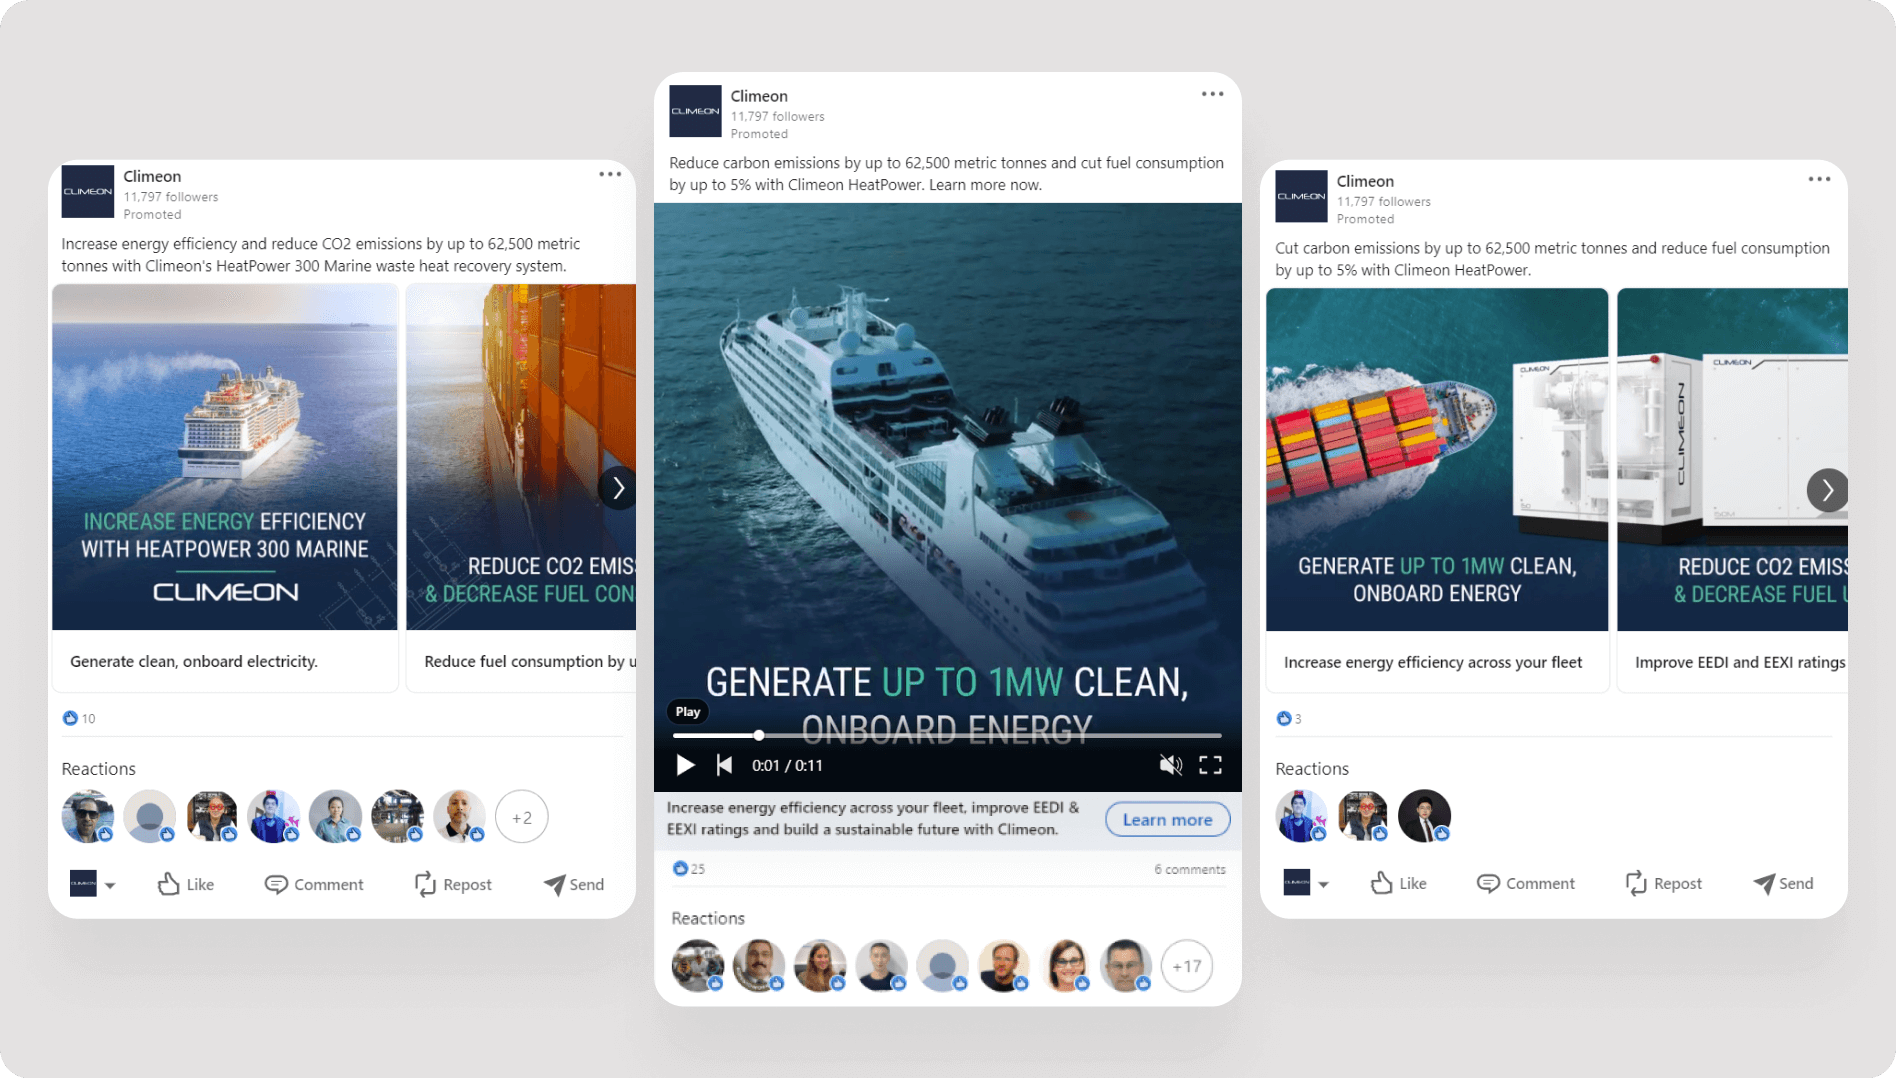 Three screenshots of LinkedIn Ads are shown. All three ads are maritime-focused and include text that relates to Climeon's HeatPower 300 Marine module. At the bottom of each image, user icons are shown indicating reactions and responses to the ads.